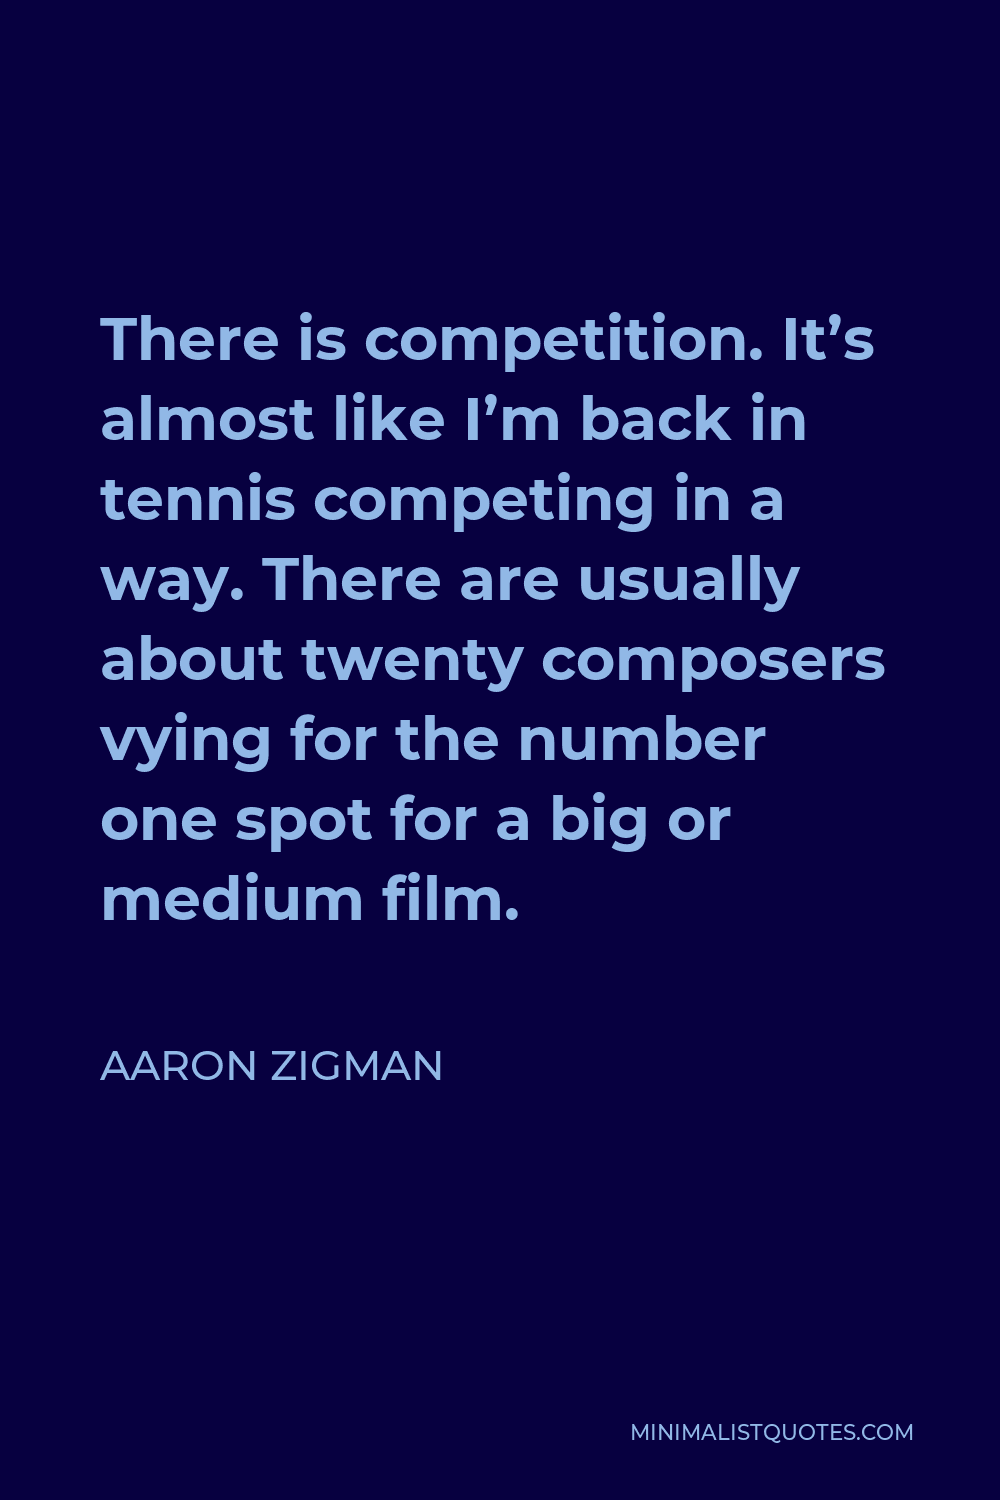 Aaron Zigman Quote - There is competition. It’s almost like I’m back in tennis competing in a way. There are usually about twenty composers vying for the number one spot for a big or medium film.